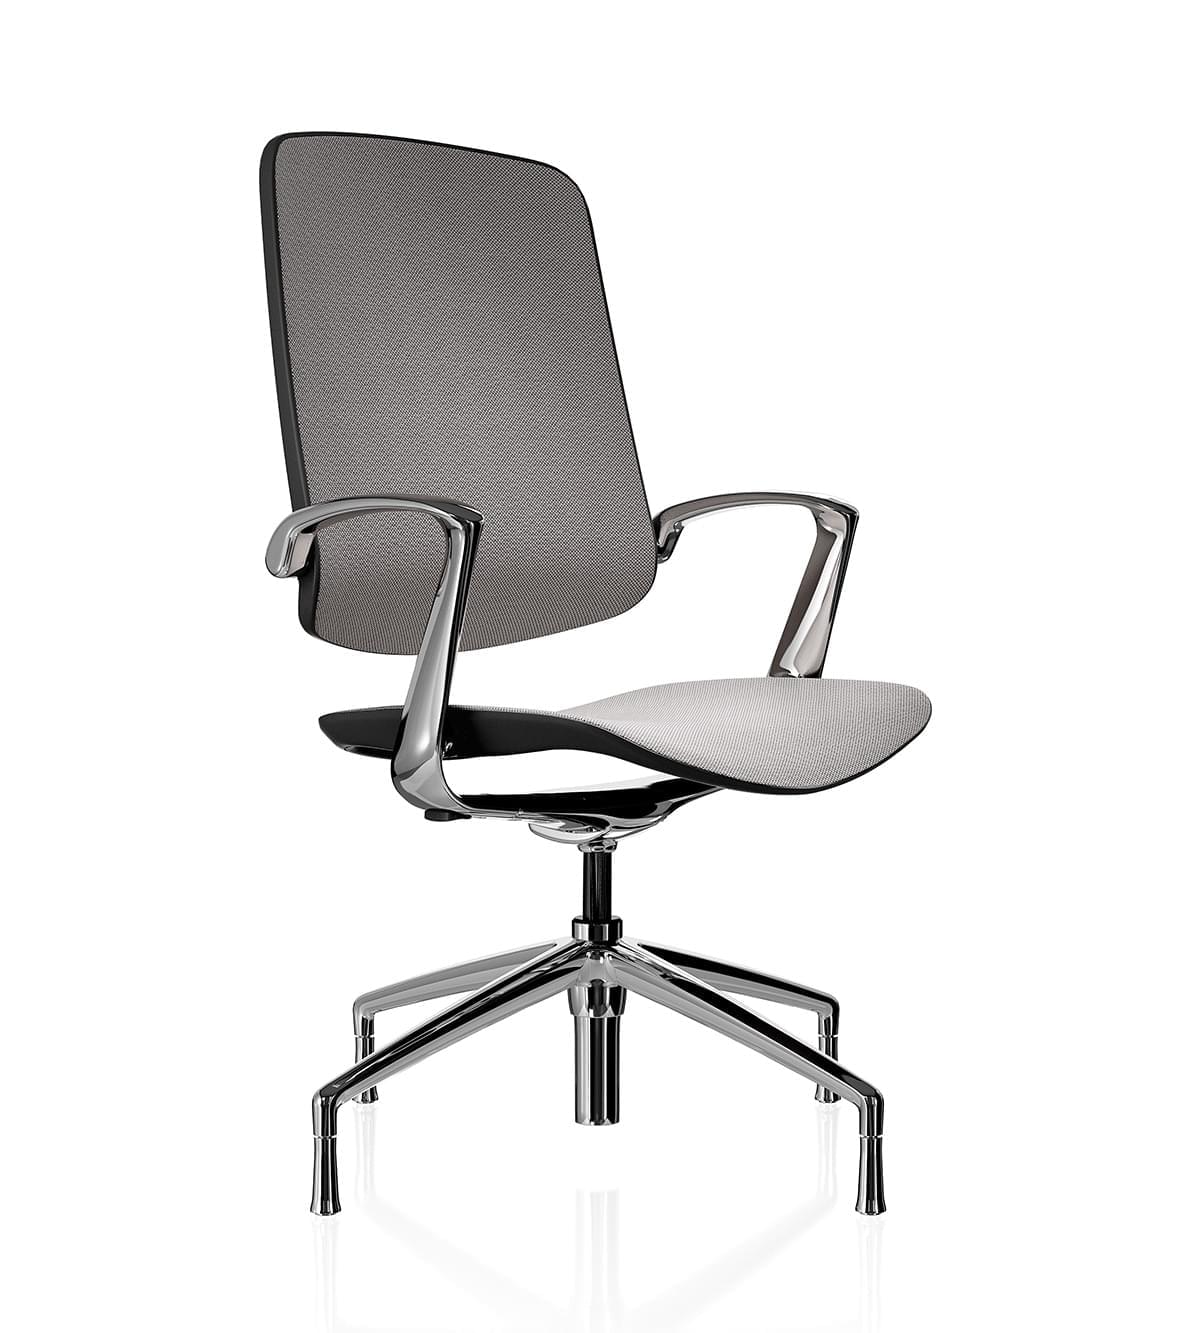 Trinetic Mesh Chair - White frame polished 4 star base with silver castors - front